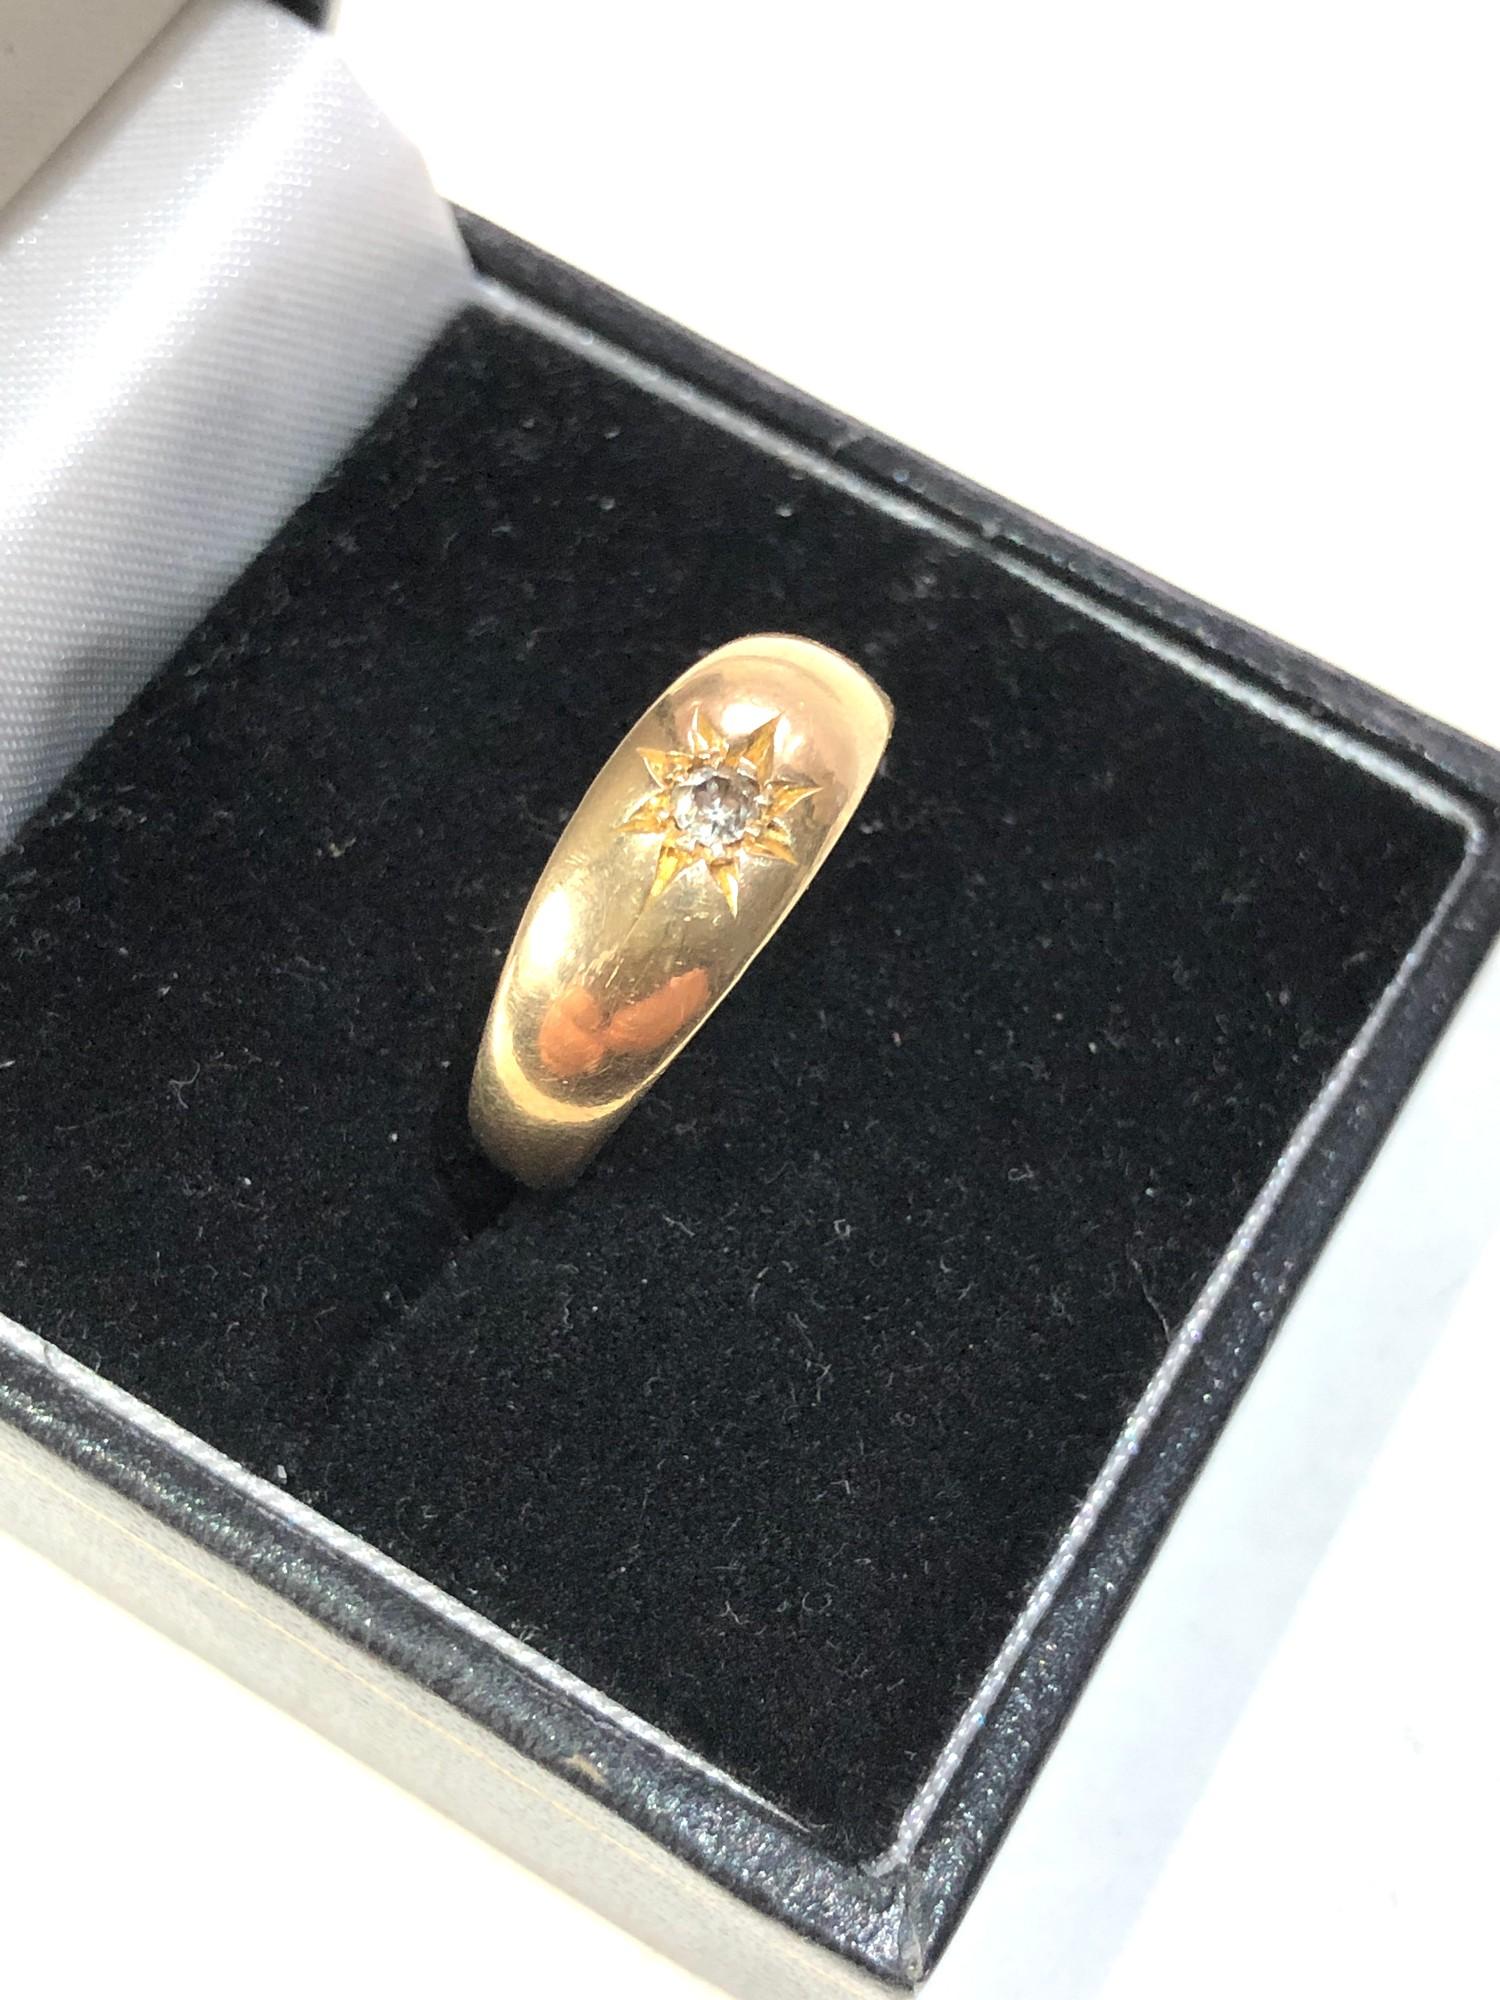 Antique 18ct gold diamond gypsy ring weight 3g - Image 2 of 4